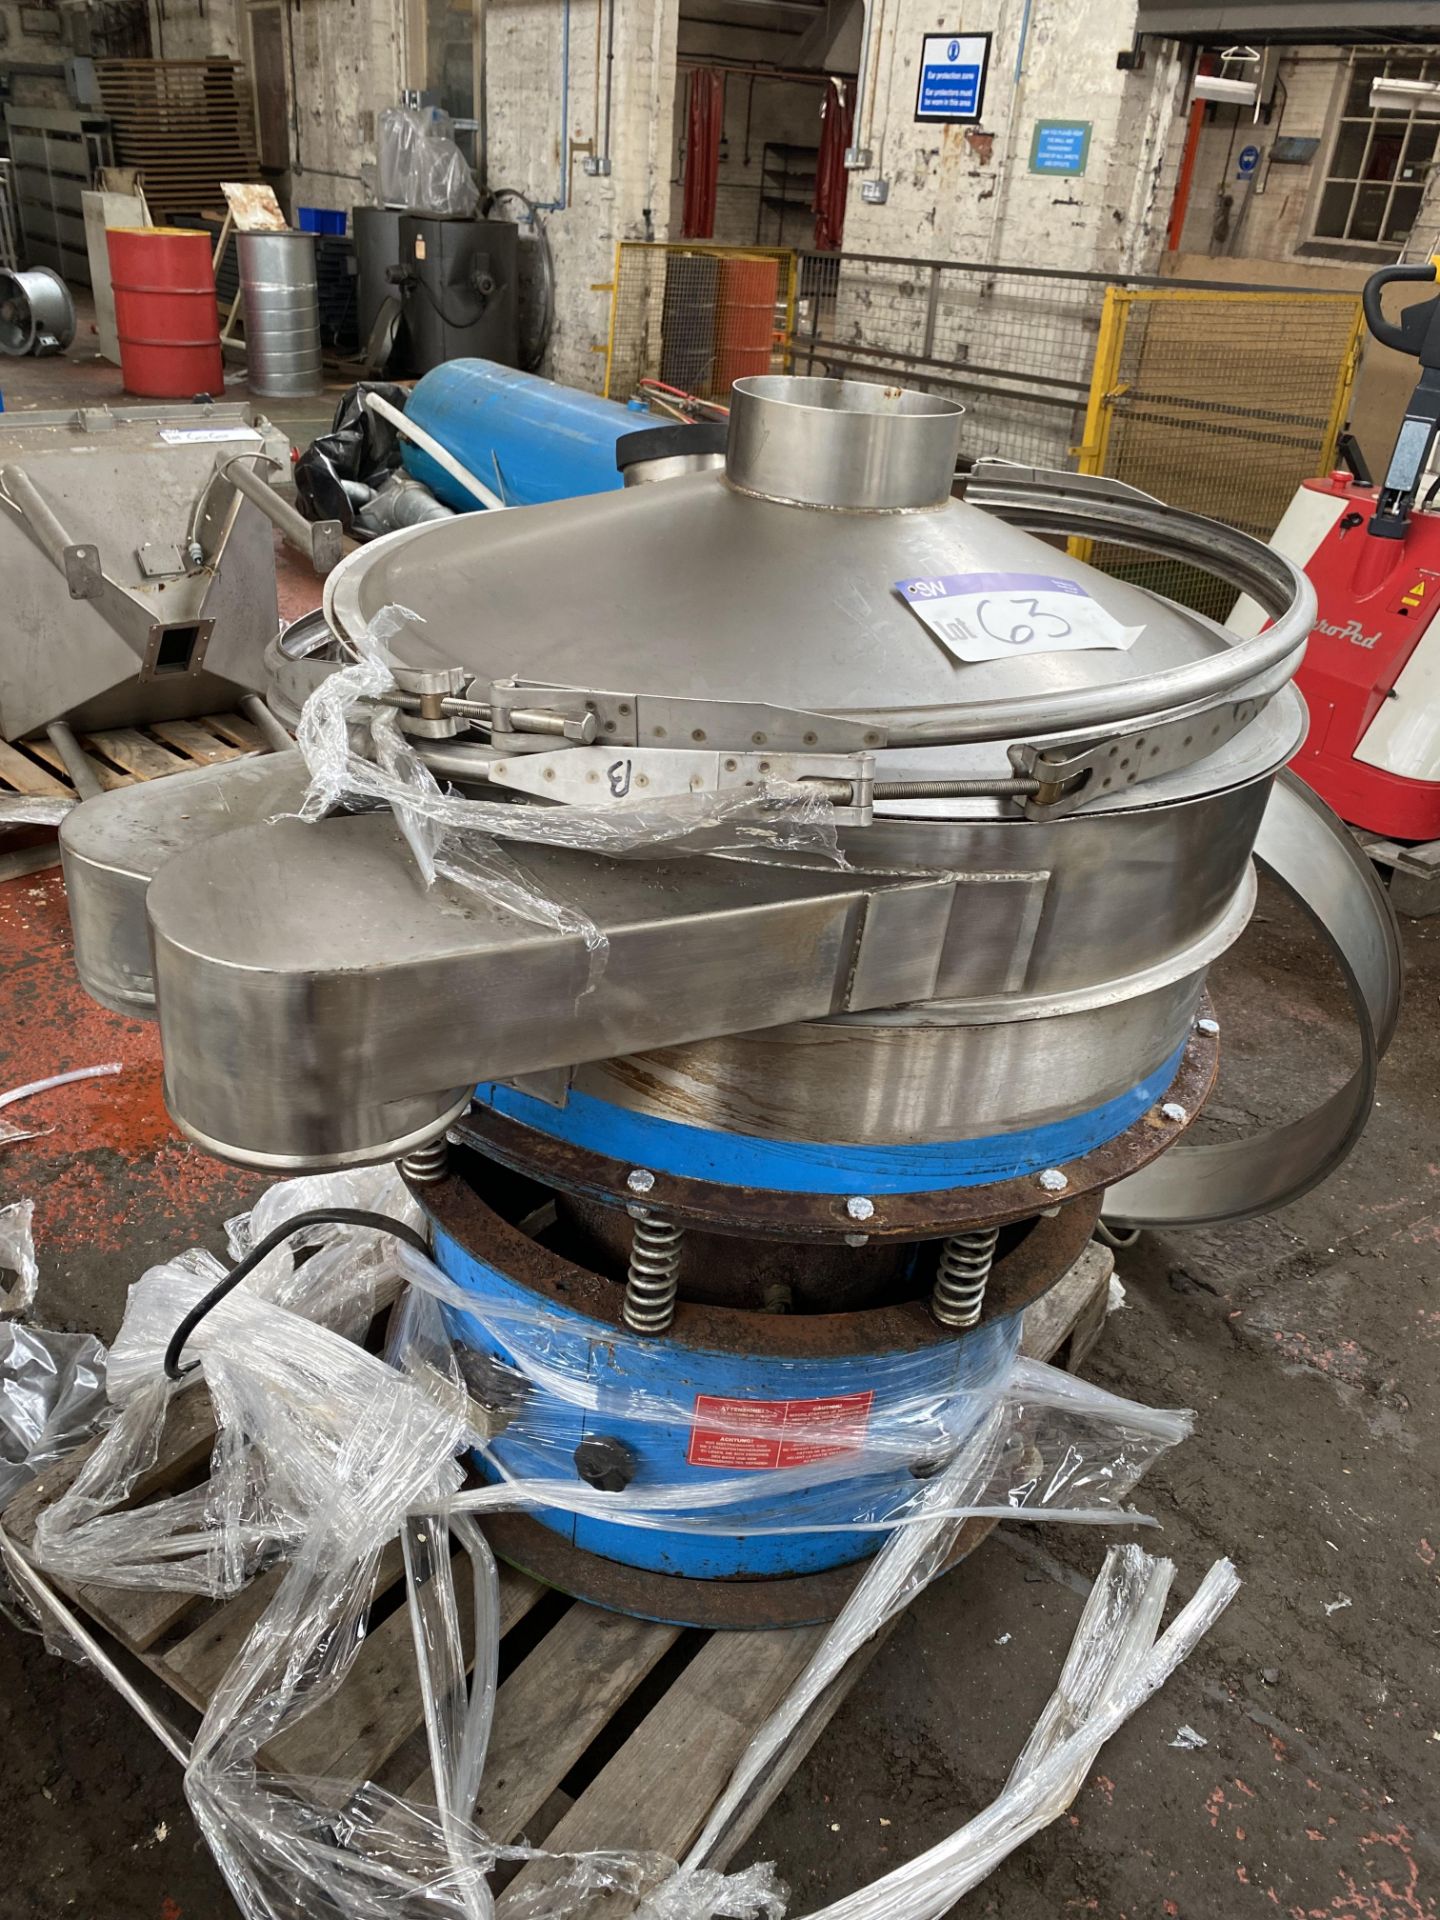 Vibrowest MR36 VIBRATORY SCREEN, serial no. 2228Please read the following important notes:-